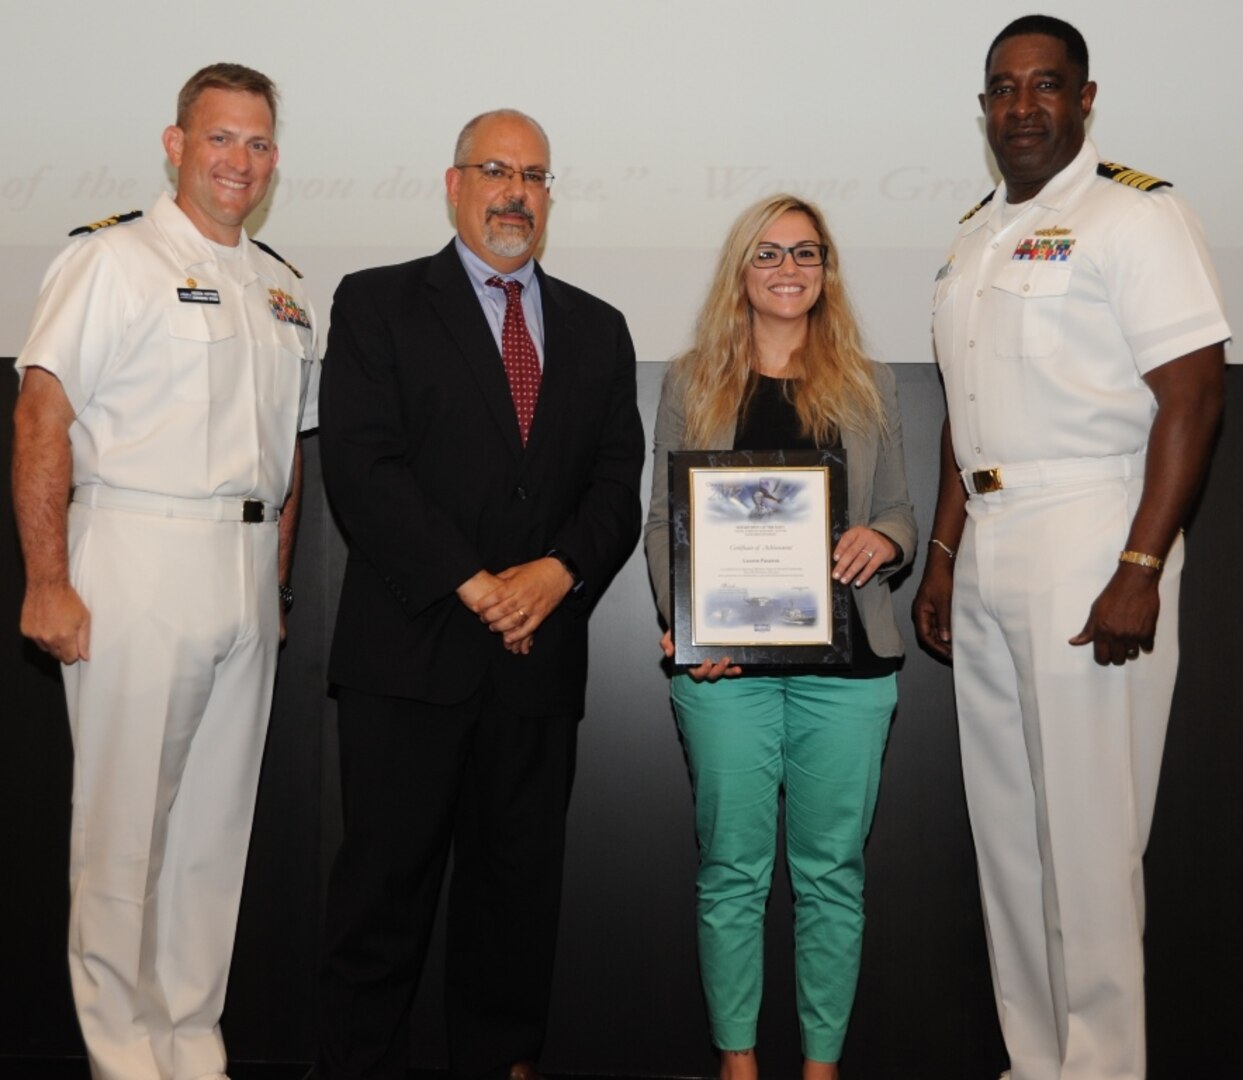 IMAGE: DAHLGREN, Va. - Lauren Pasanen receives her certificate of achievement from Naval Surface Warfare Center Dahlgren Division (NSWCDD) Technical Director John Fiore, NSWCDD Commanding Officer Capt. Godfrey 'Gus' Weekes, right, and Combat Direction Systems Activity Dam Neck Commanding Officer Cmdr. Andrew Hoffman at the 2017 NSWCDD academic awards ceremony. Pasanen was recognized for completing her bachelor's in electrical engineering from Old Dominion University, and commended for her commitment to personal and professional development.